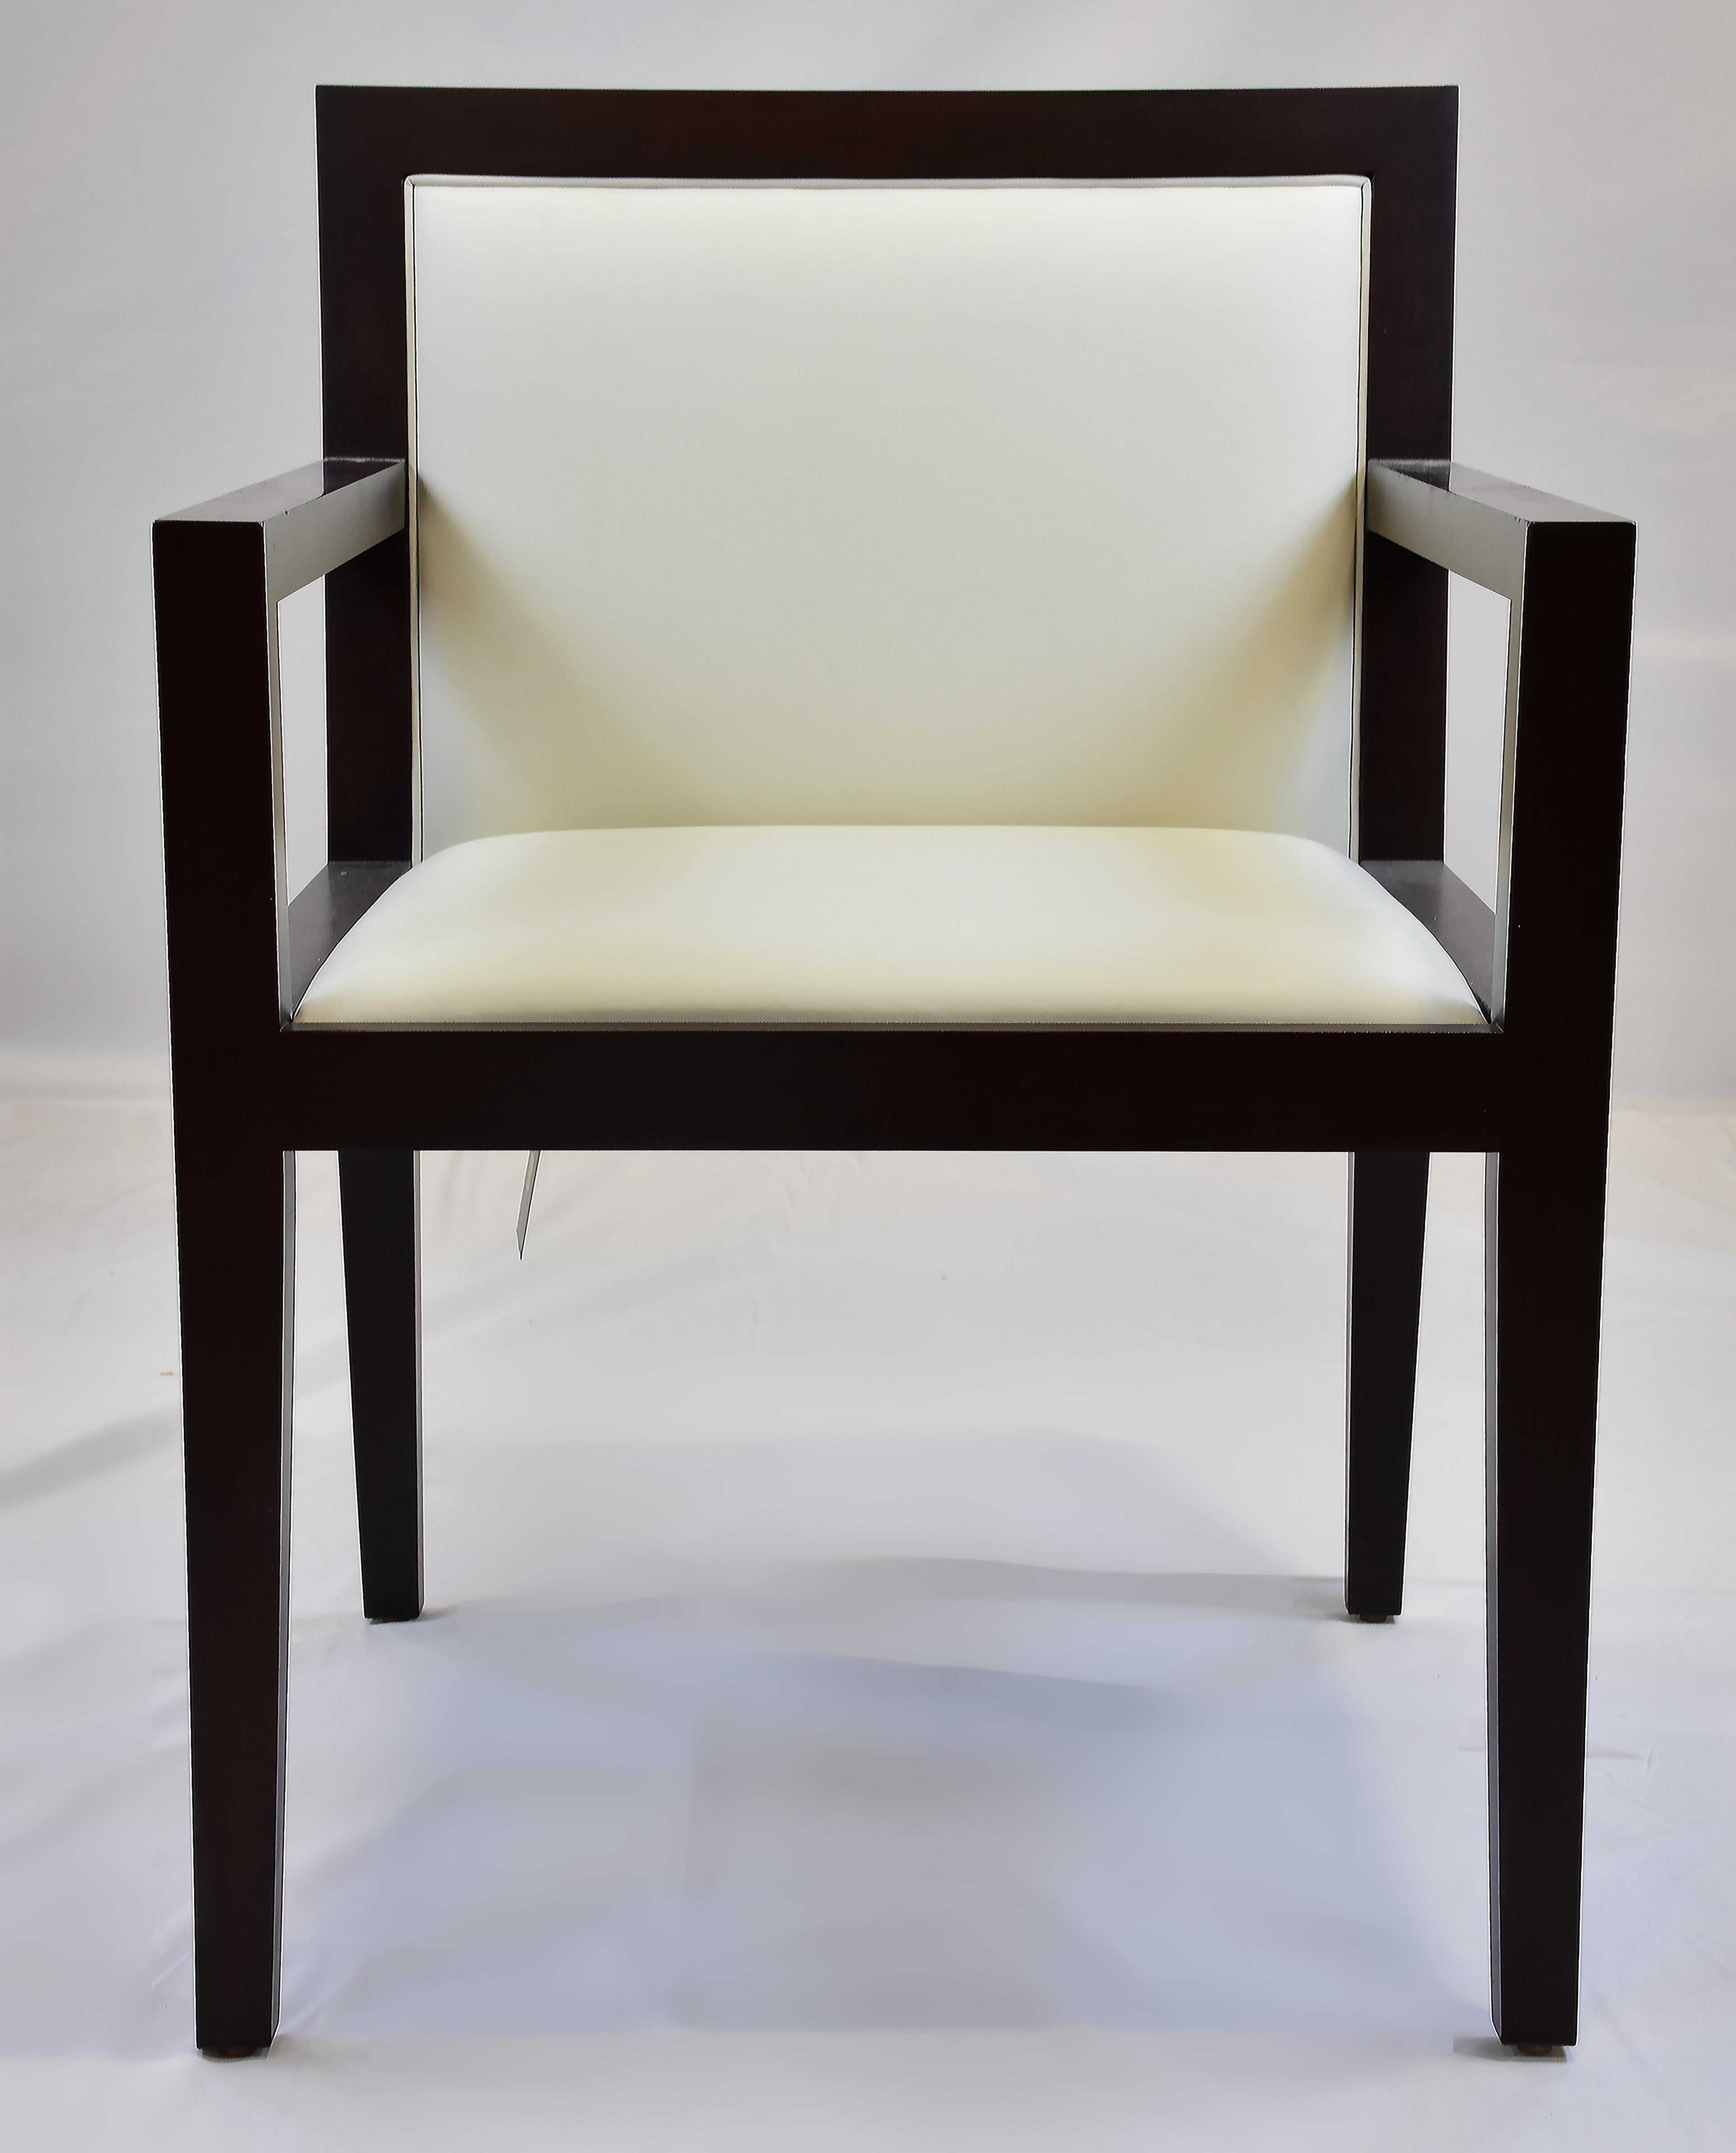 Le Jeune Upholstery SLJ1 Dining Desk Armchair Showroom Model

Offered for sale is a Le Jeune Upholstery showroom model SLJ1	DC5.923	Dining Armchair. This is a wood-arm modern desk chair with a thin upholstered seat and back panels all covered in an